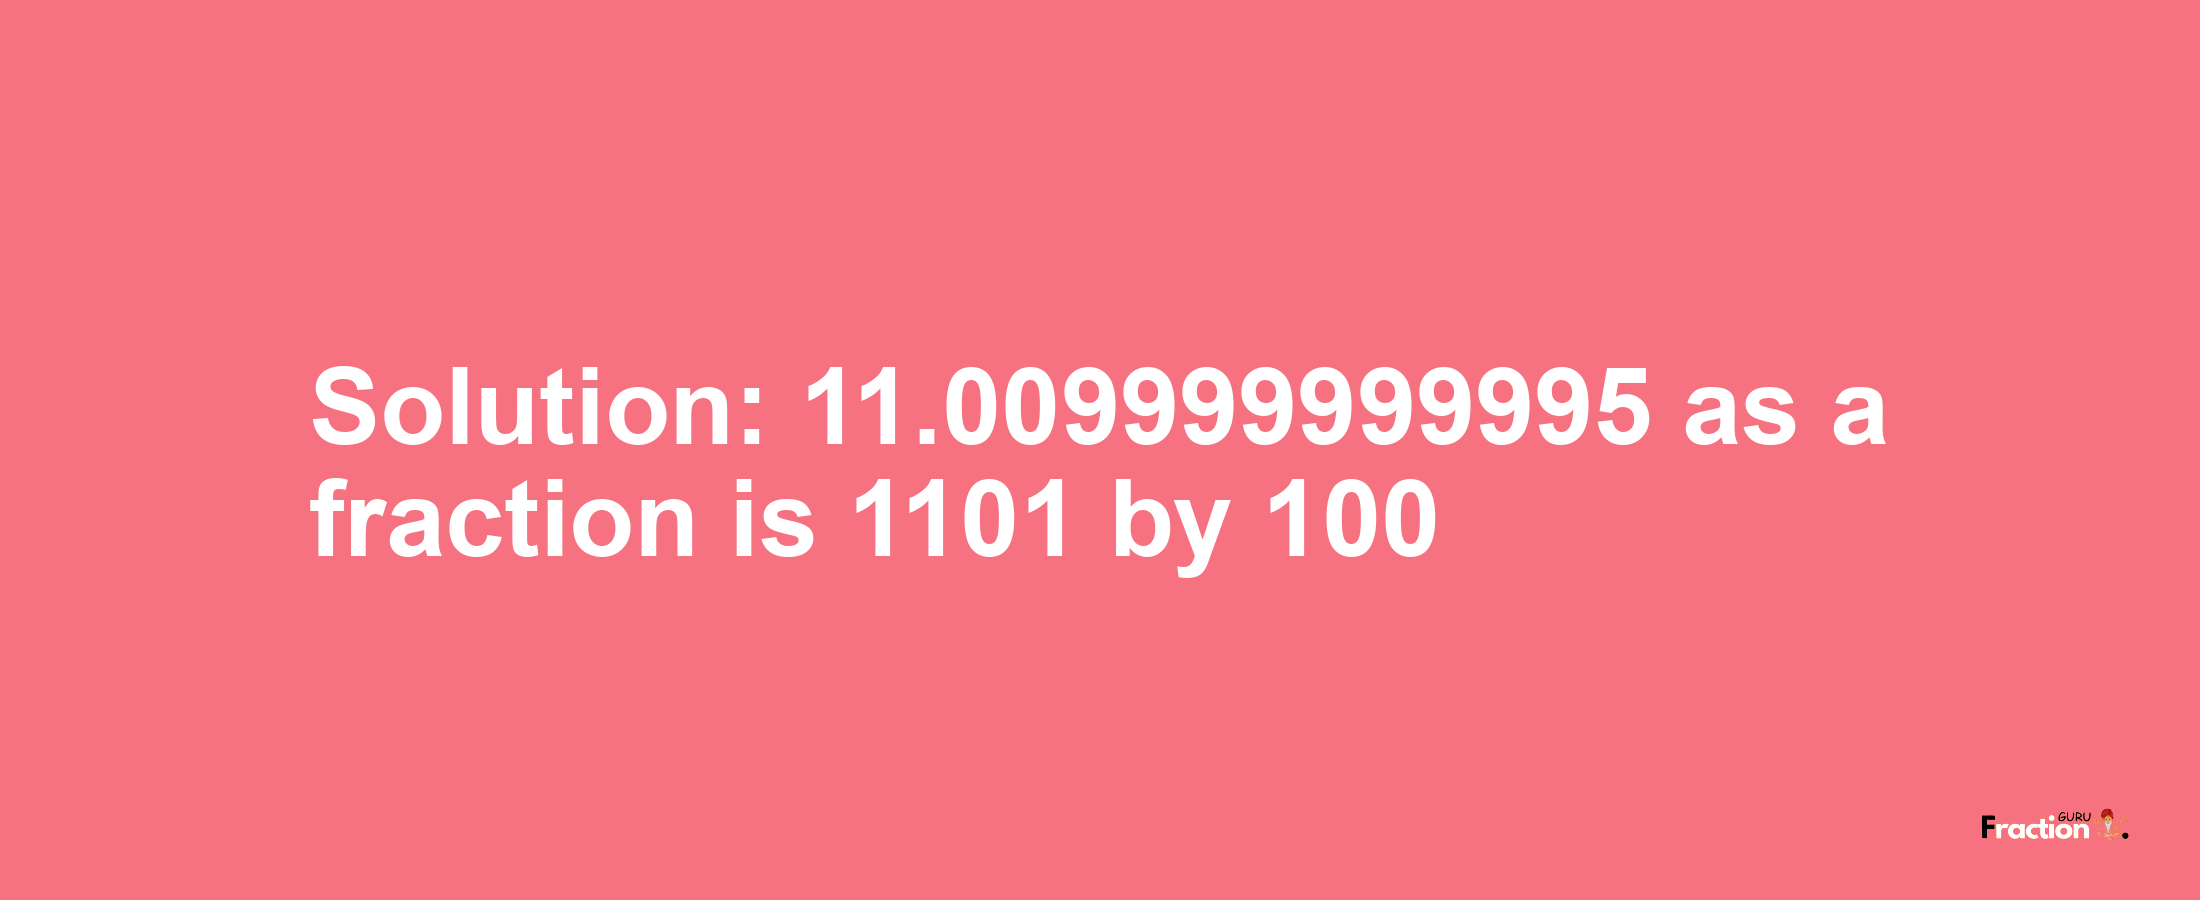 Solution:11.009999999995 as a fraction is 1101/100